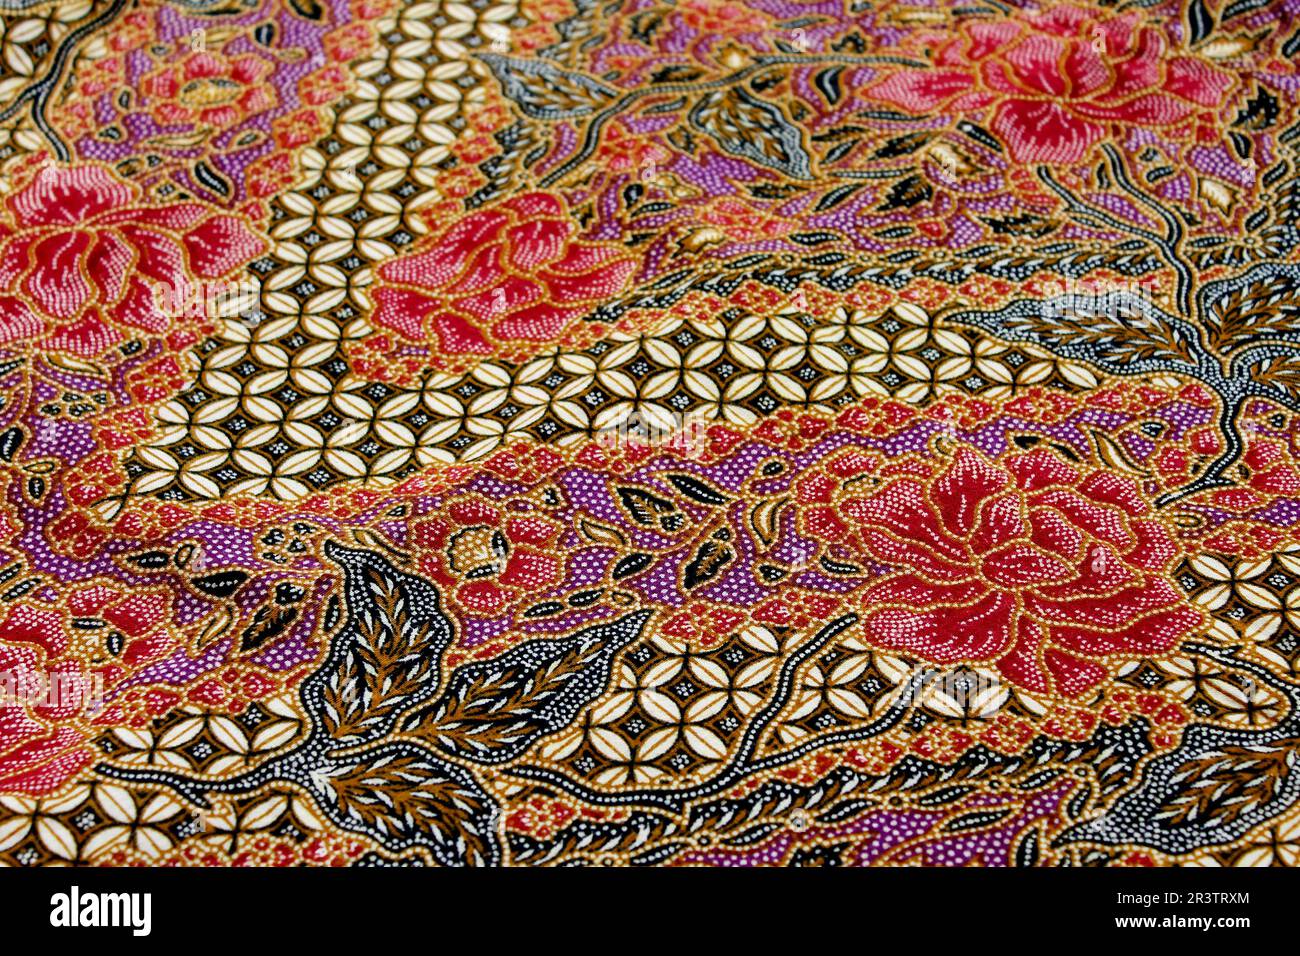 Batik fabrics are Indonesian textiles made using wax-resist dyeing. They feature intricate patterns and vibrant colors, holding cultural significance Stock Photo